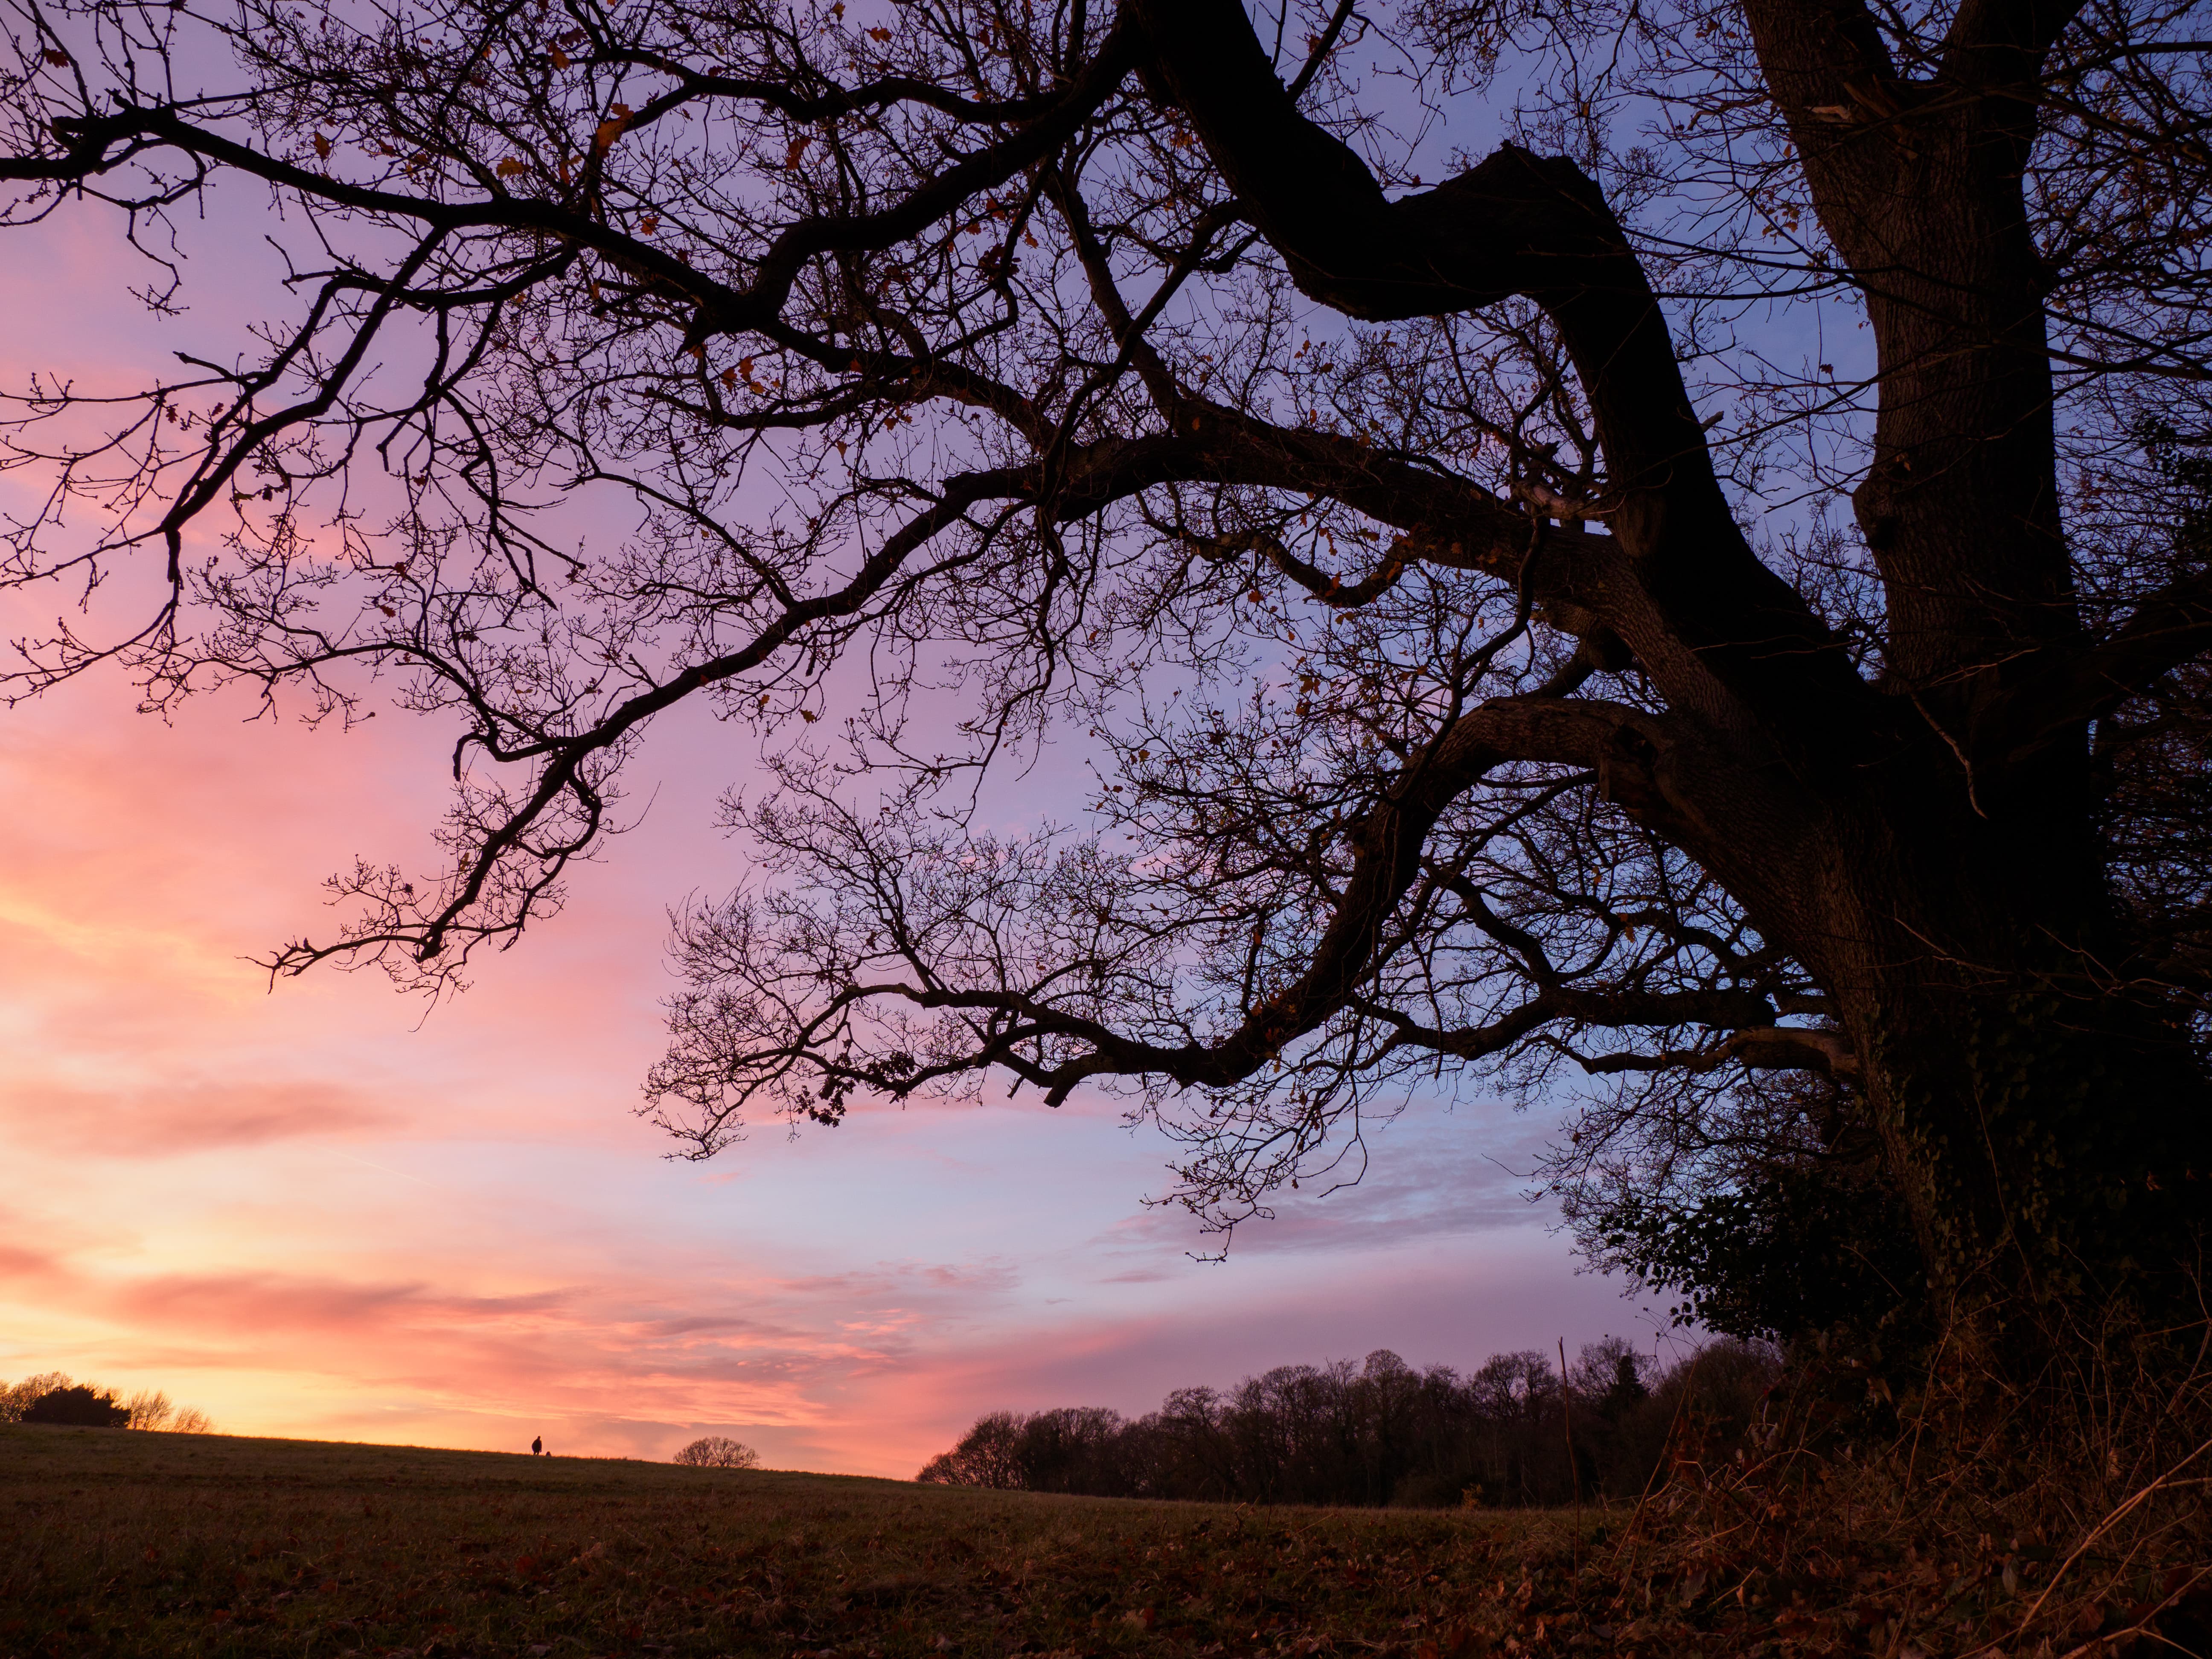 12-100mm lens sample photo, 1/25s, f/5.6, ISO200, 12mm, E-M1 II, orange and purple sunset with a silhouette of a tree